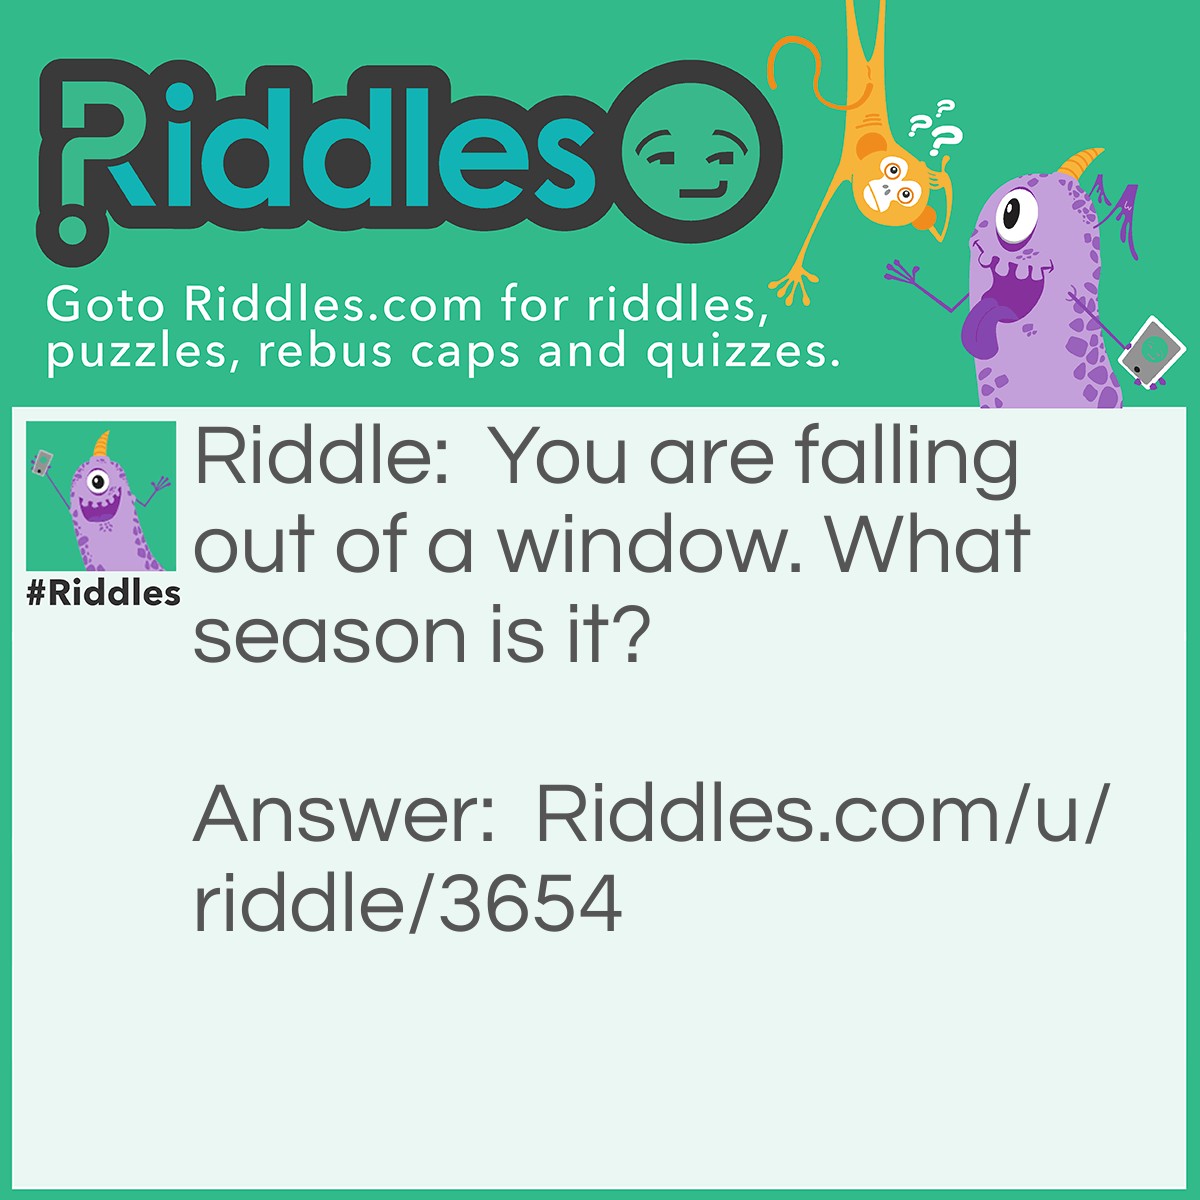 Riddle: You are falling out of a window. What season is it? Answer: Fall.